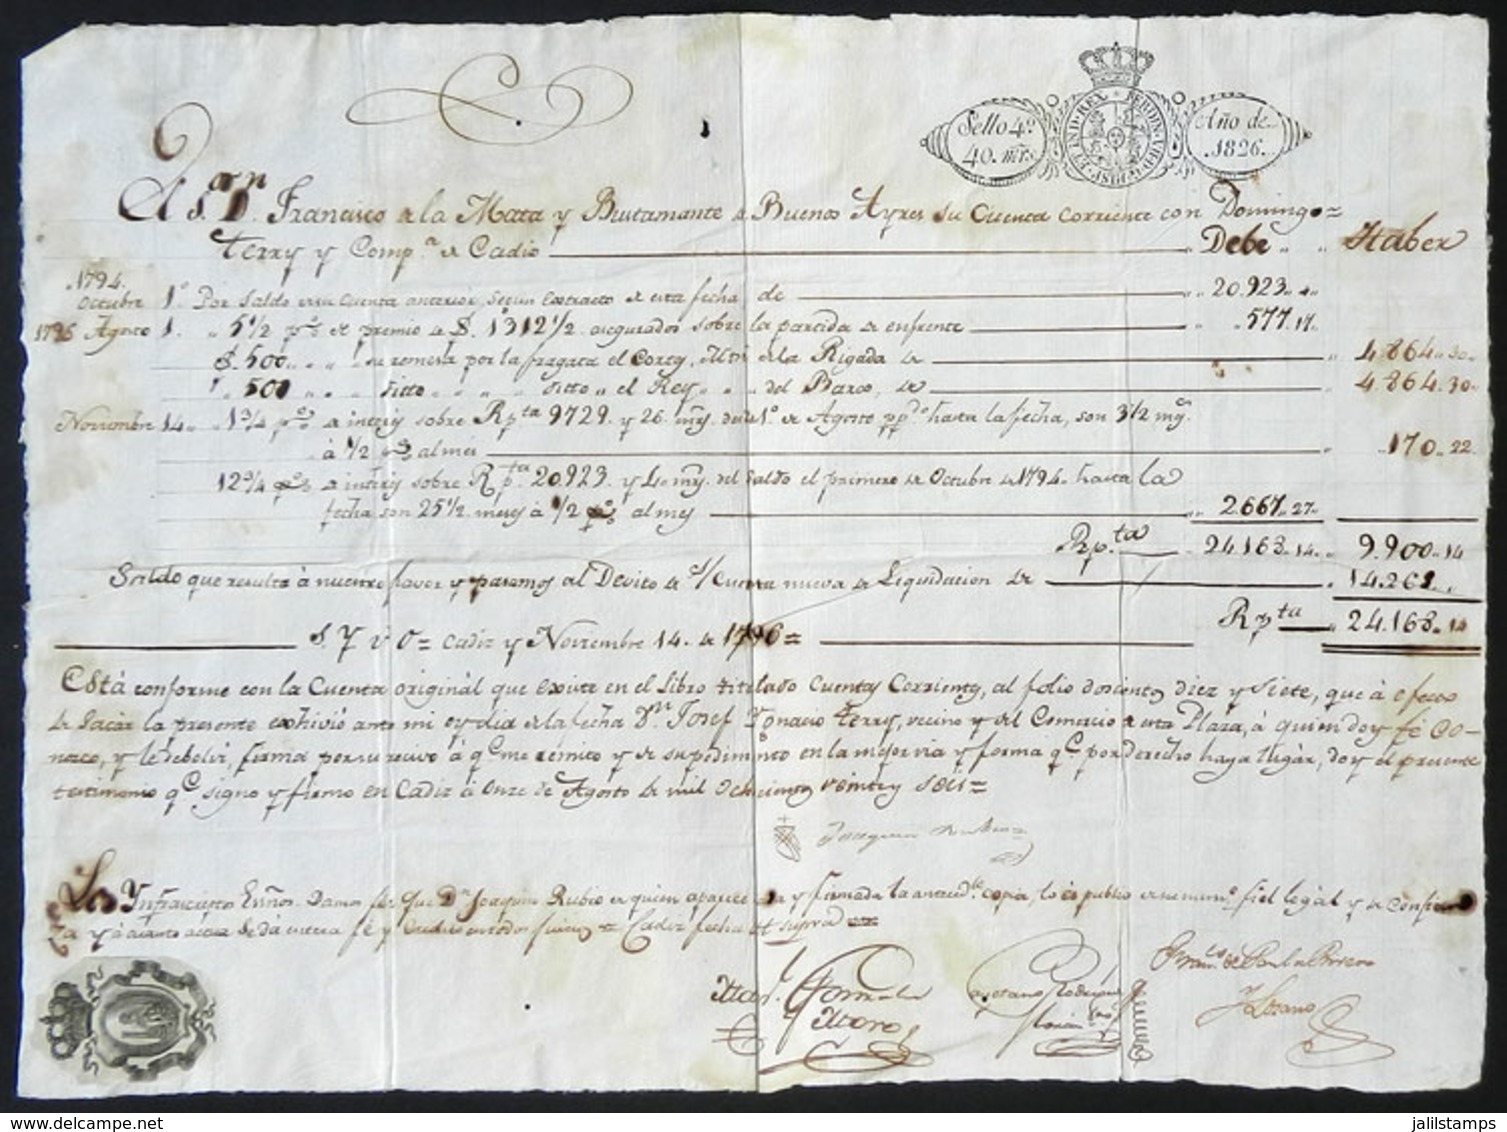 SPAIN: Interesting Document Of 1826, With The Balance Of The Credit Of Francisco Mata From Buenos Aires With Domingo Ter - Spain